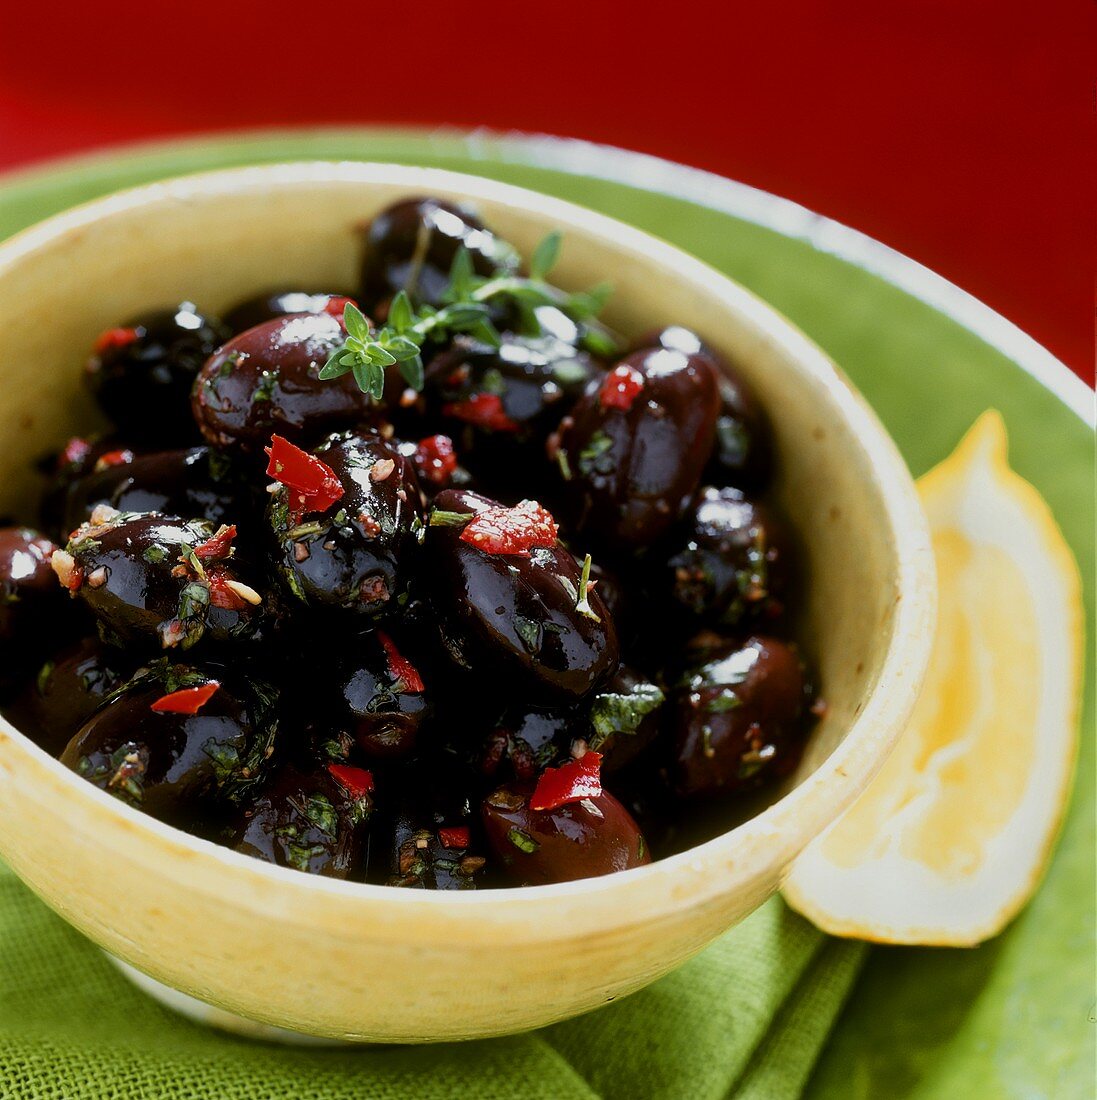 Bottled black olives in a yellow bowl